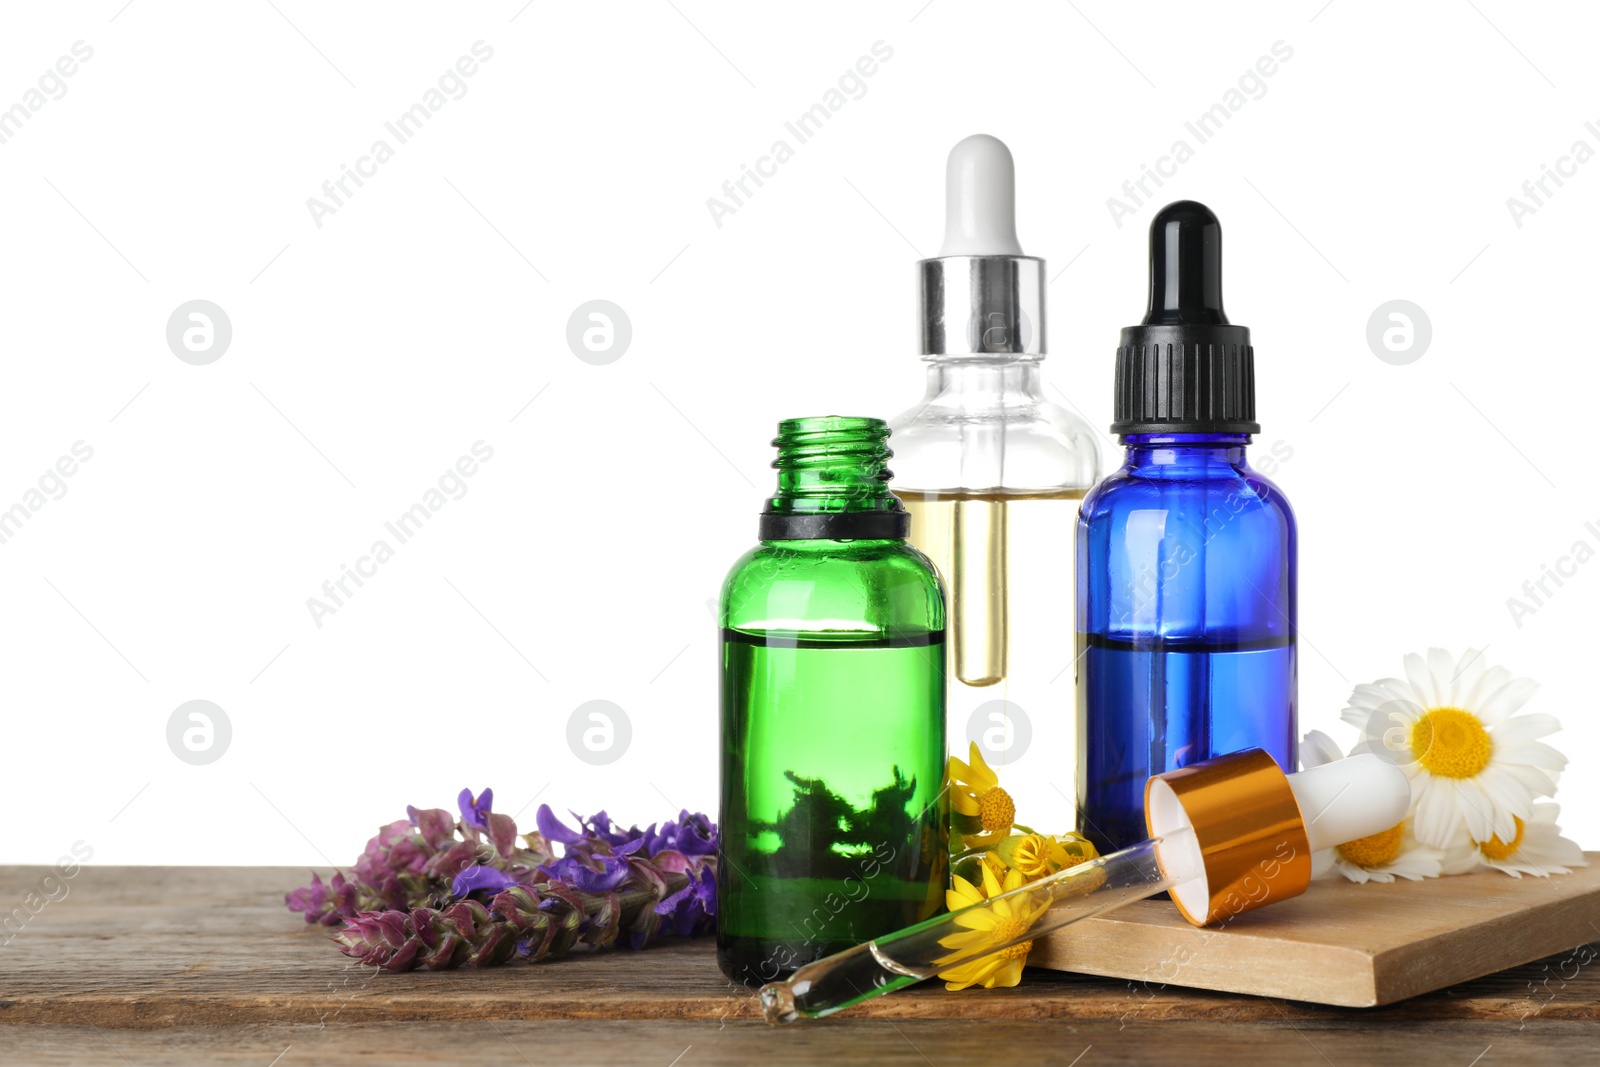 Photo of Bottles of different essential oils and wildflowers on wooden table, white background